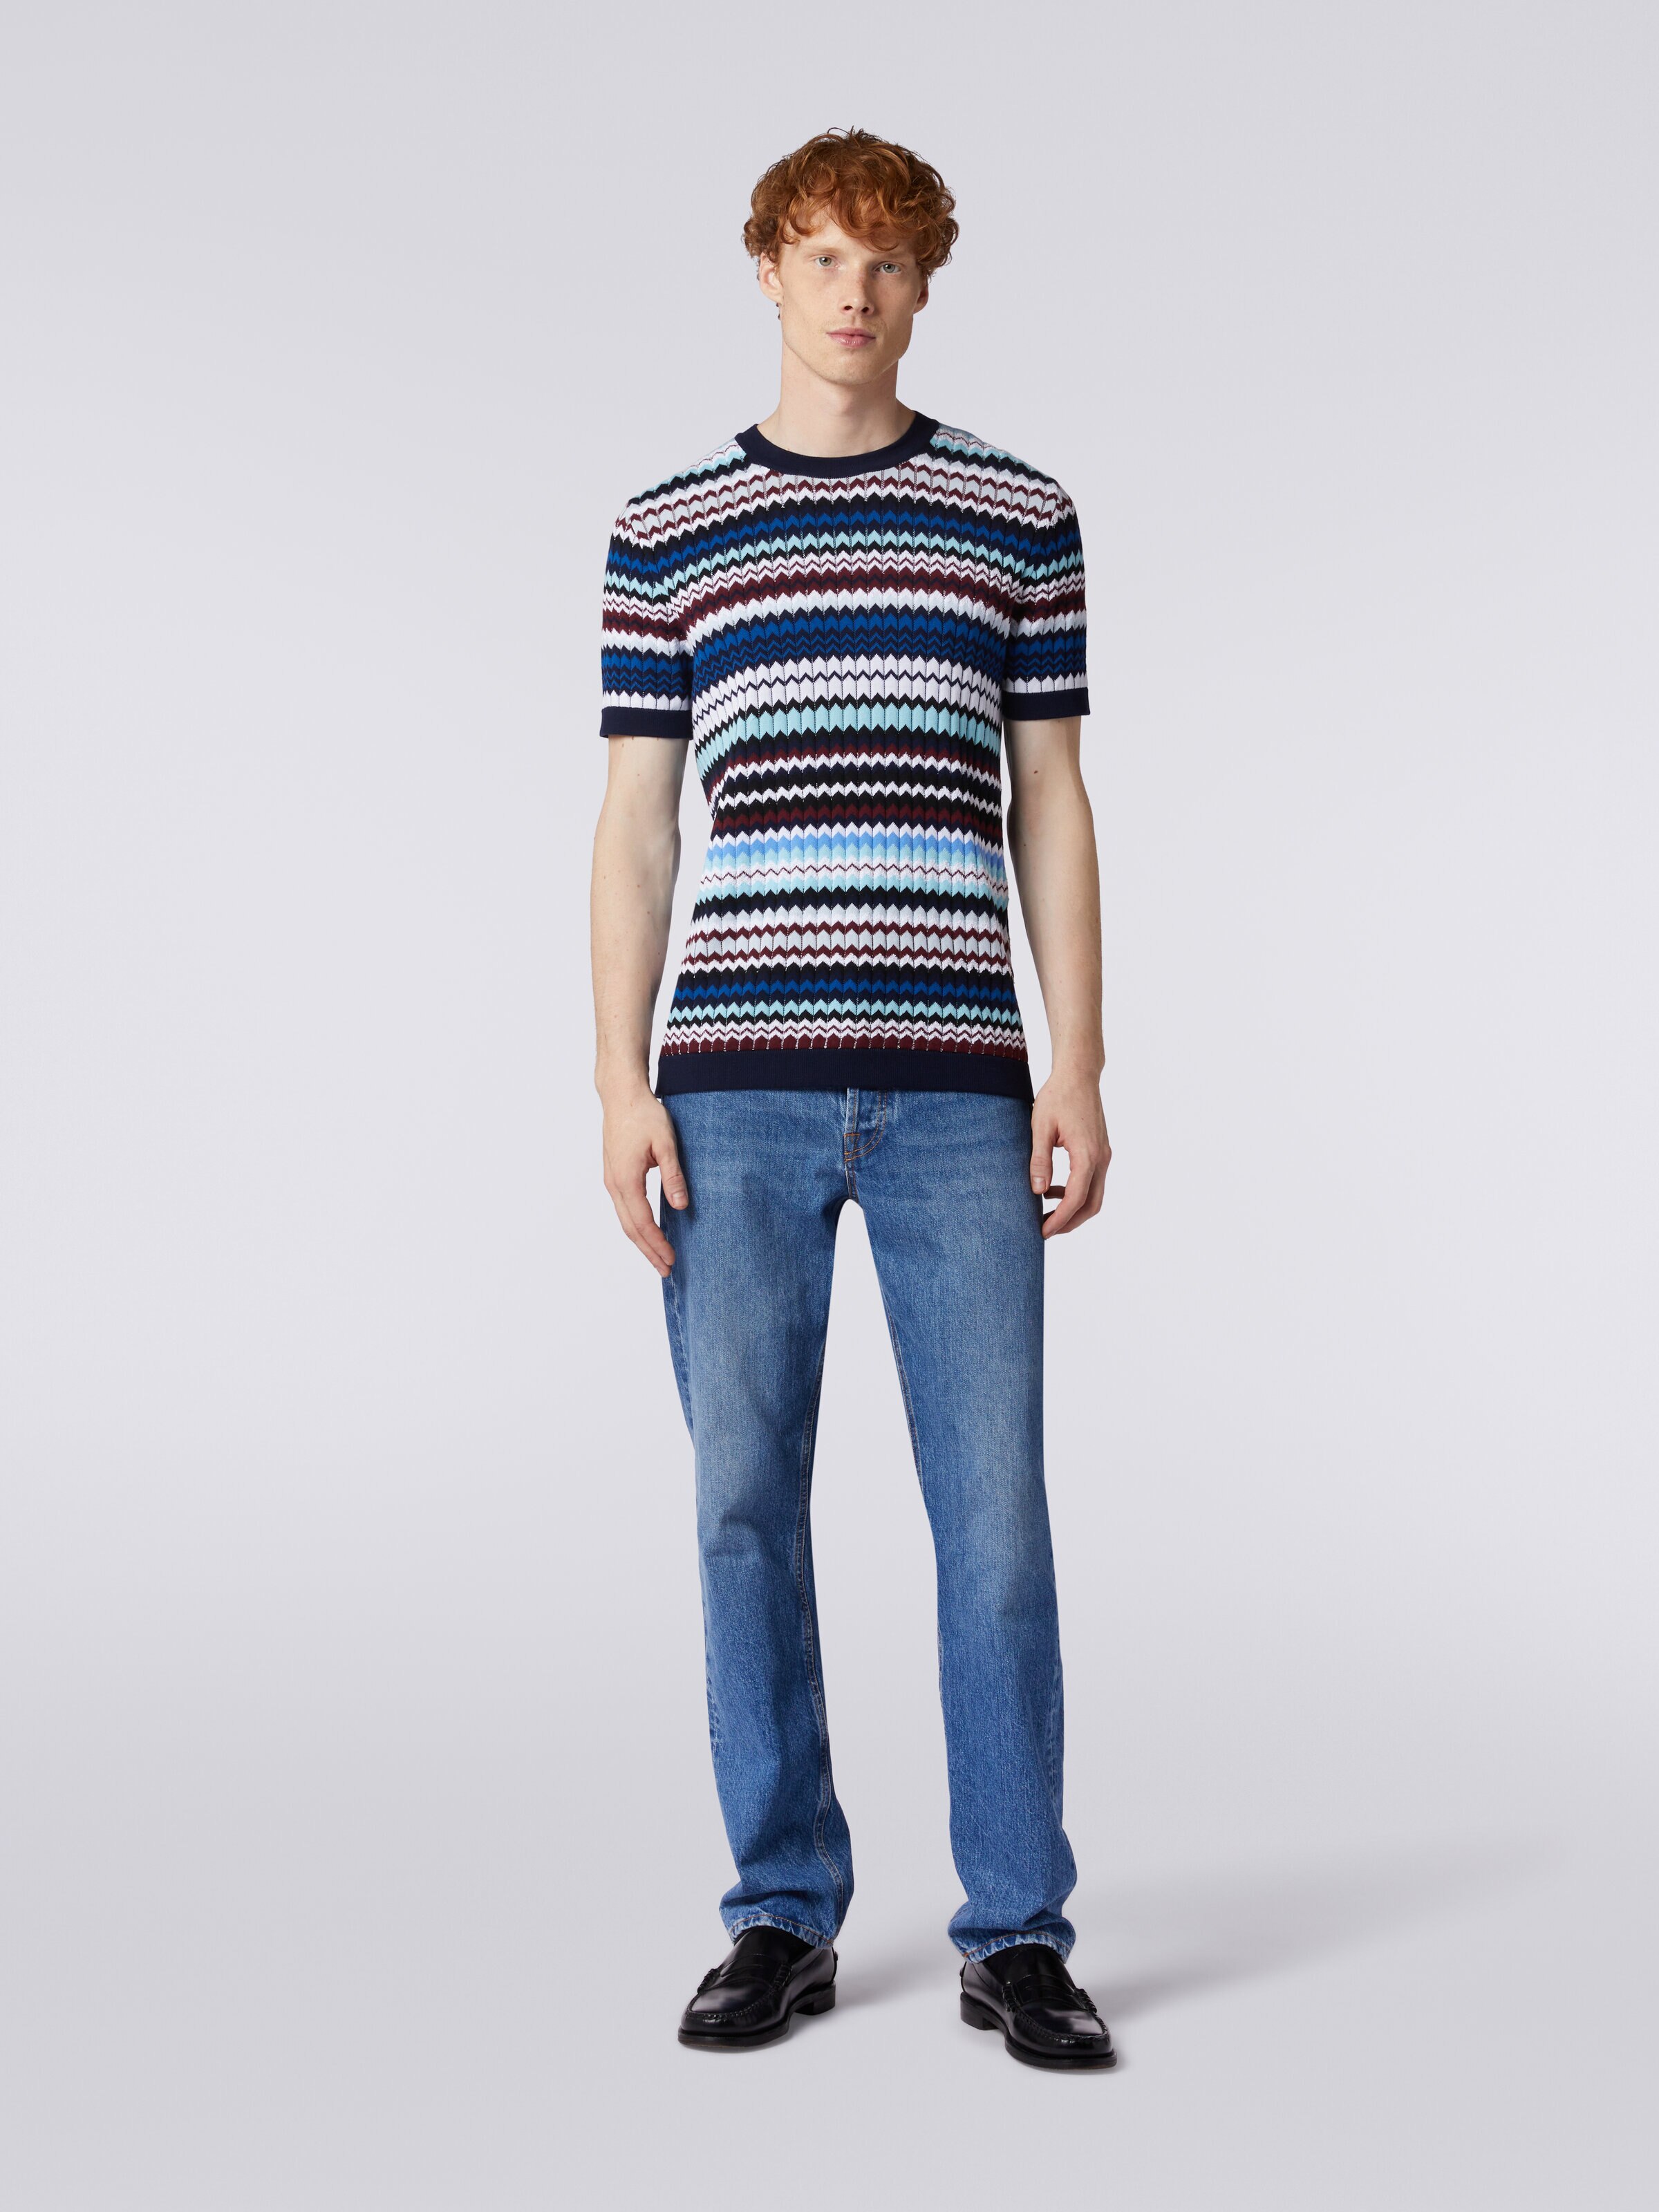 T-shirt in ribbed zigzag cotton knit, Multicoloured  - 1